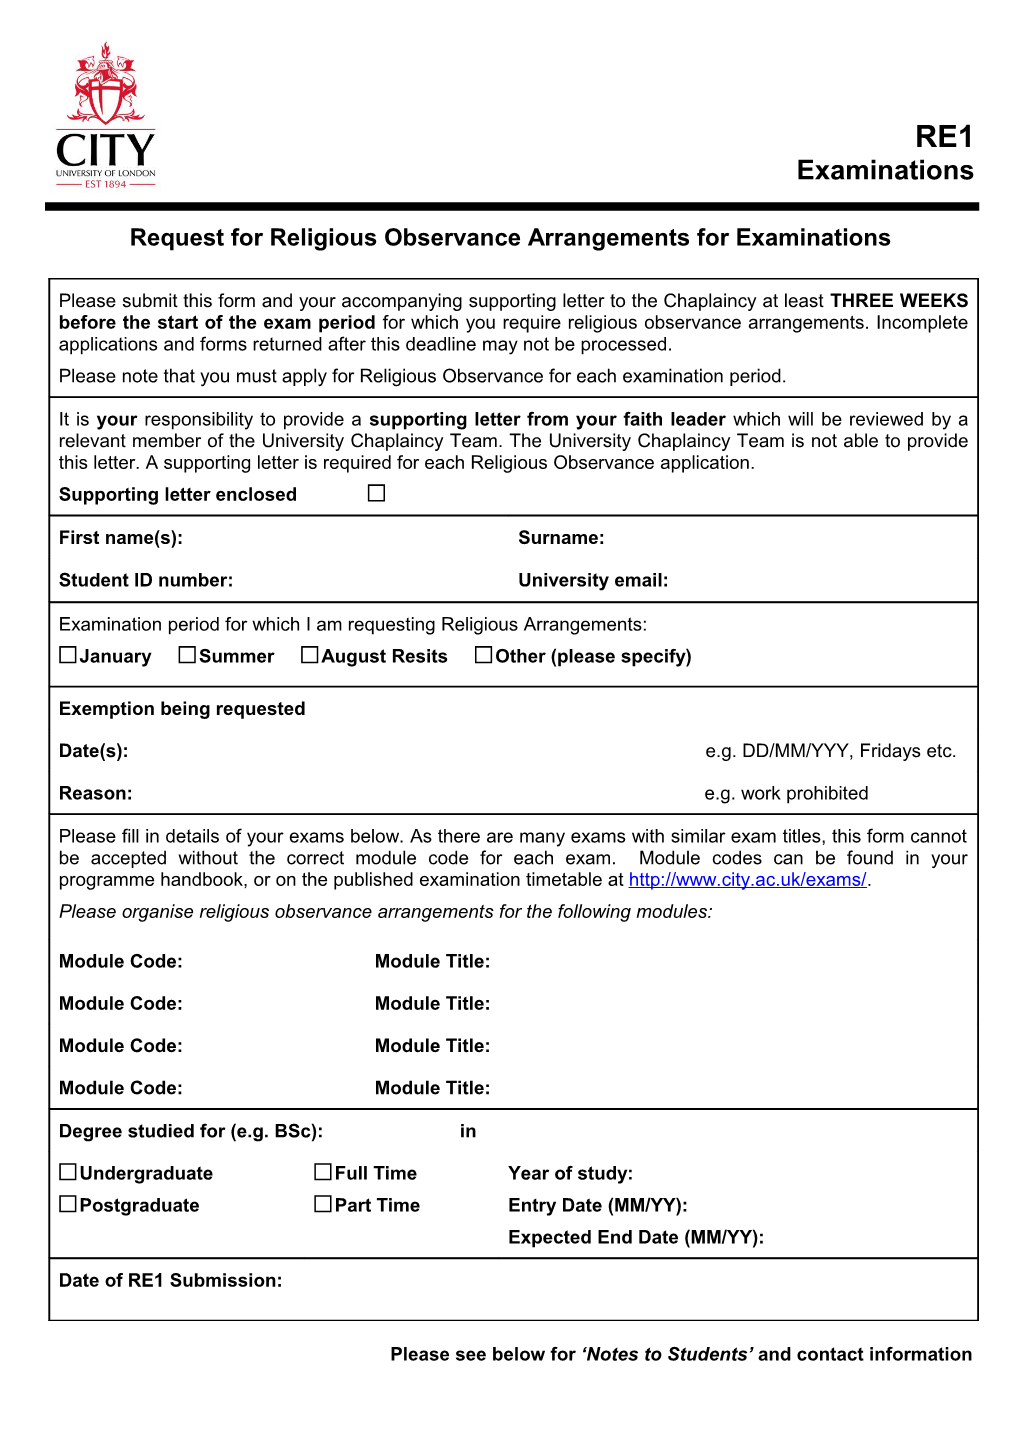 Request for Religious Observance Arrangements for Examinations